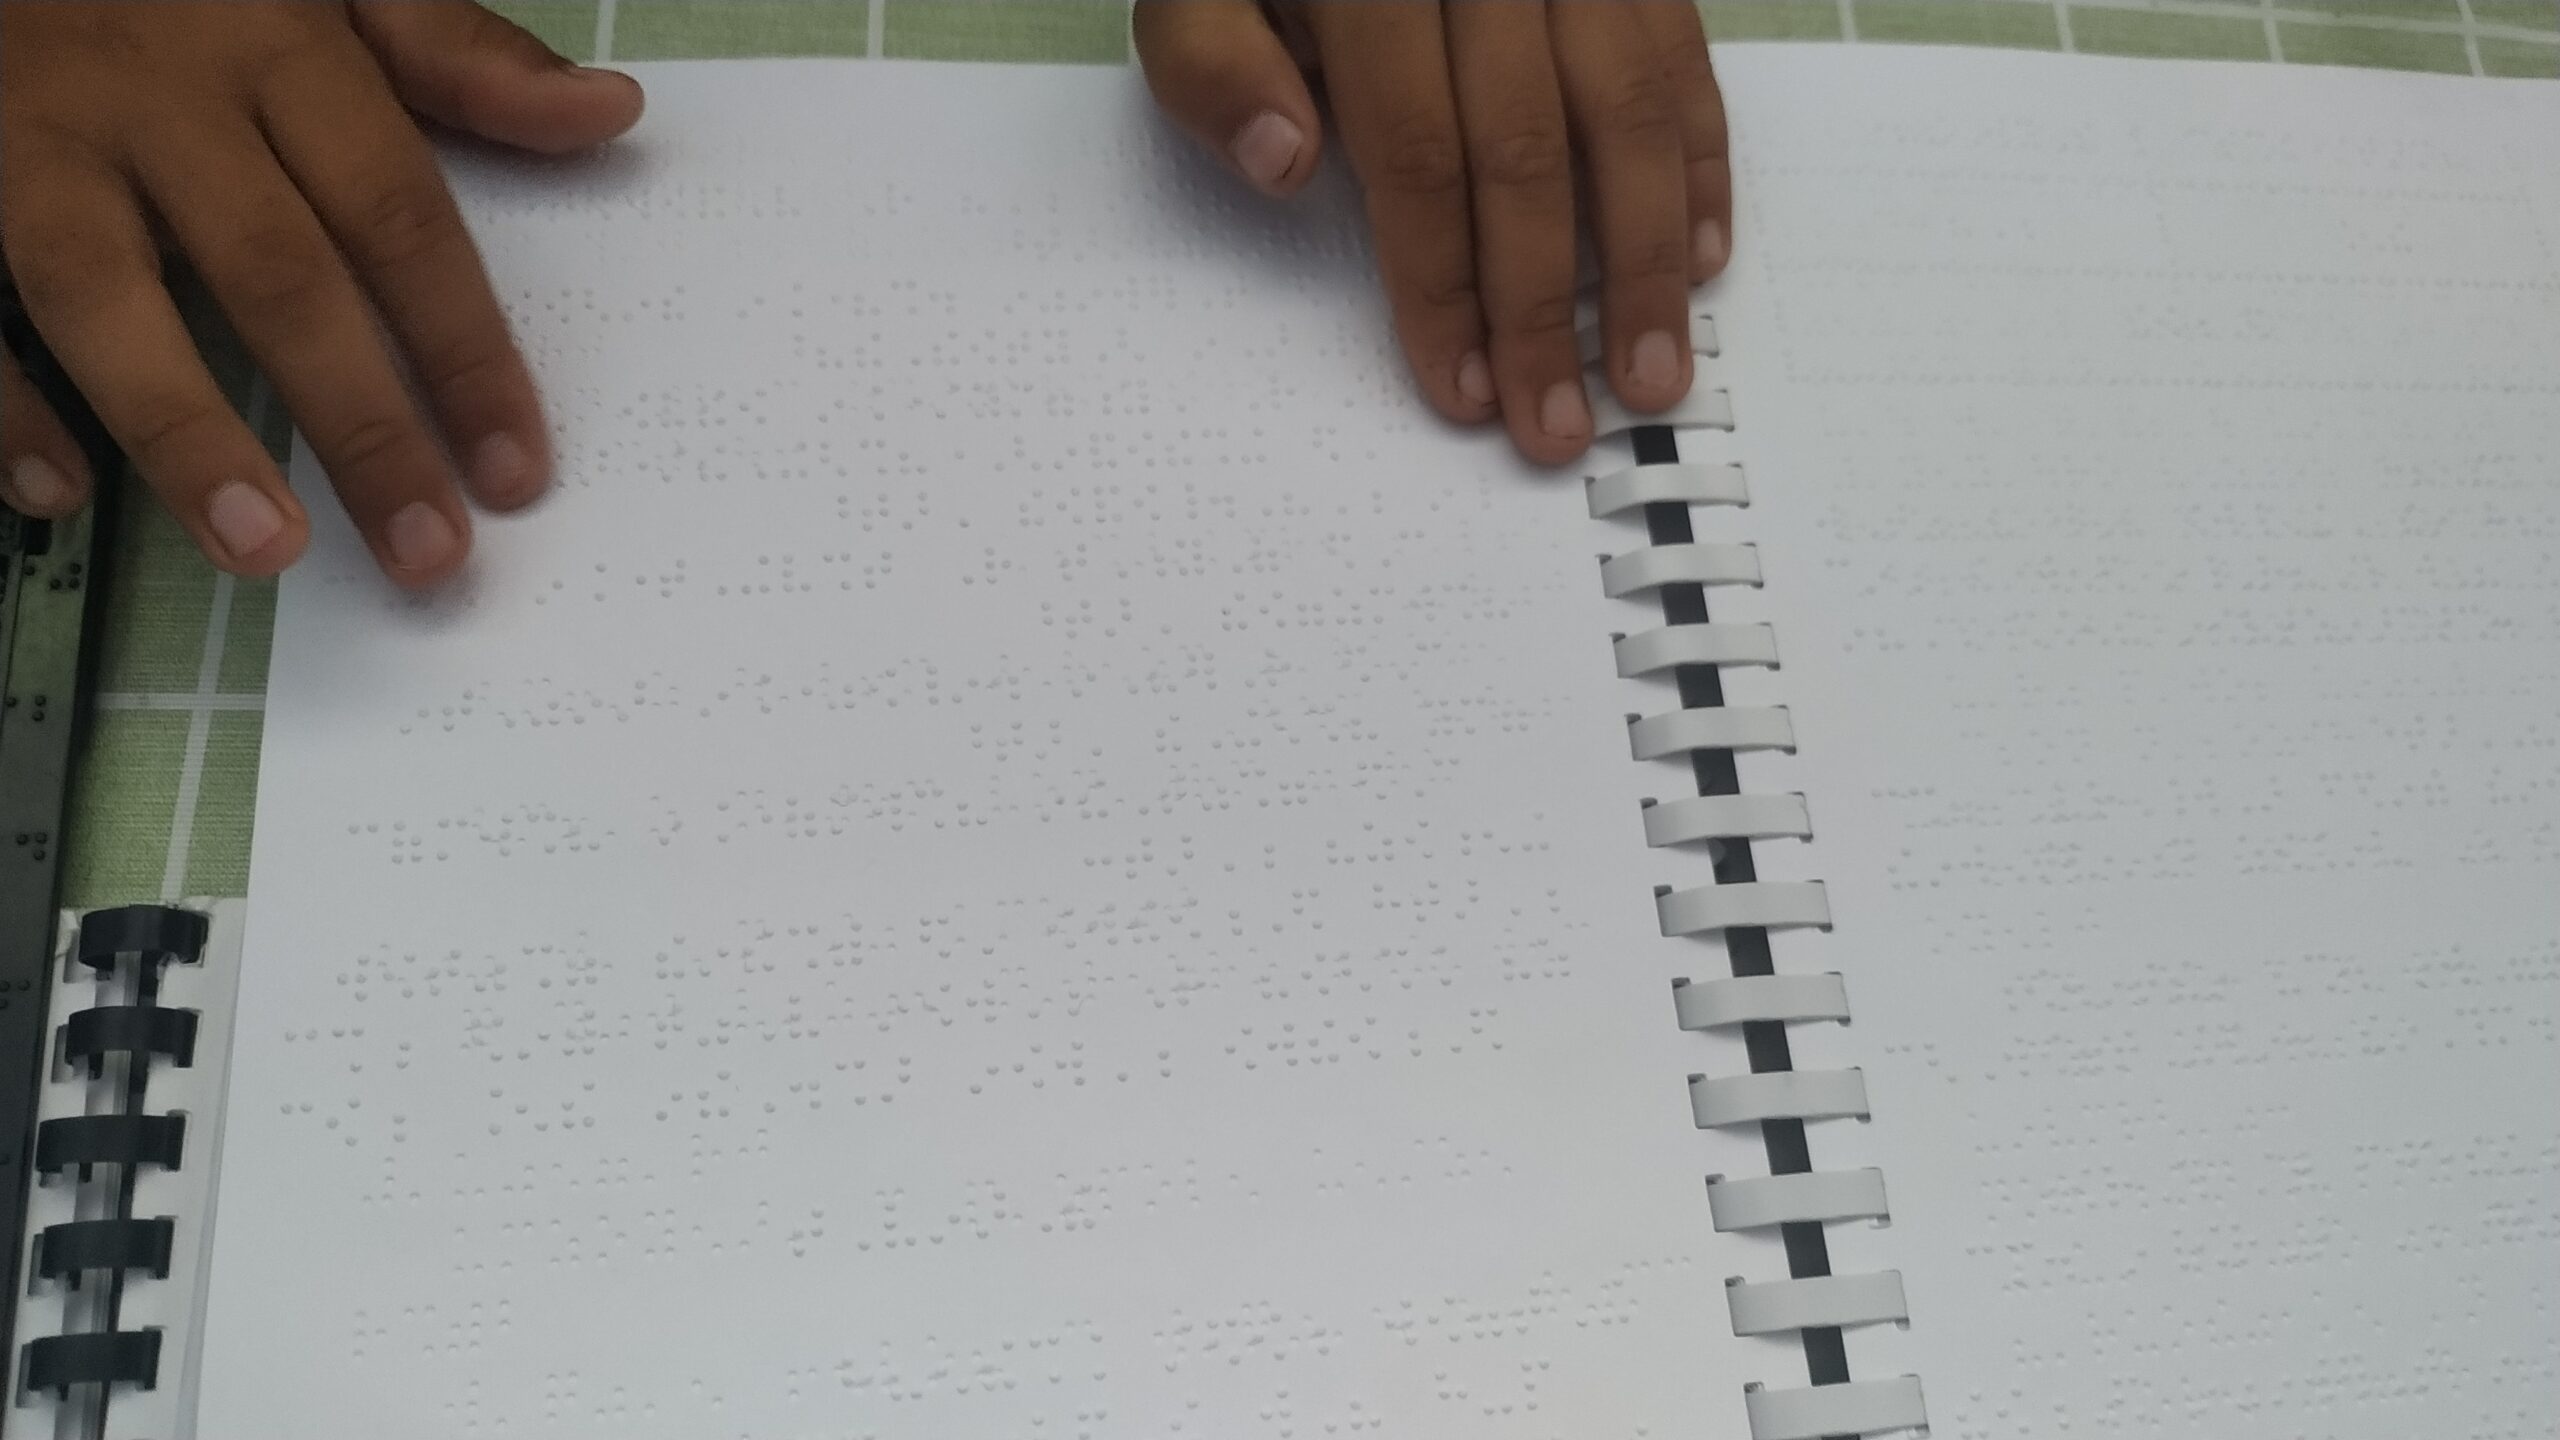 Special Braille textbook. Photo: CABAR.asia